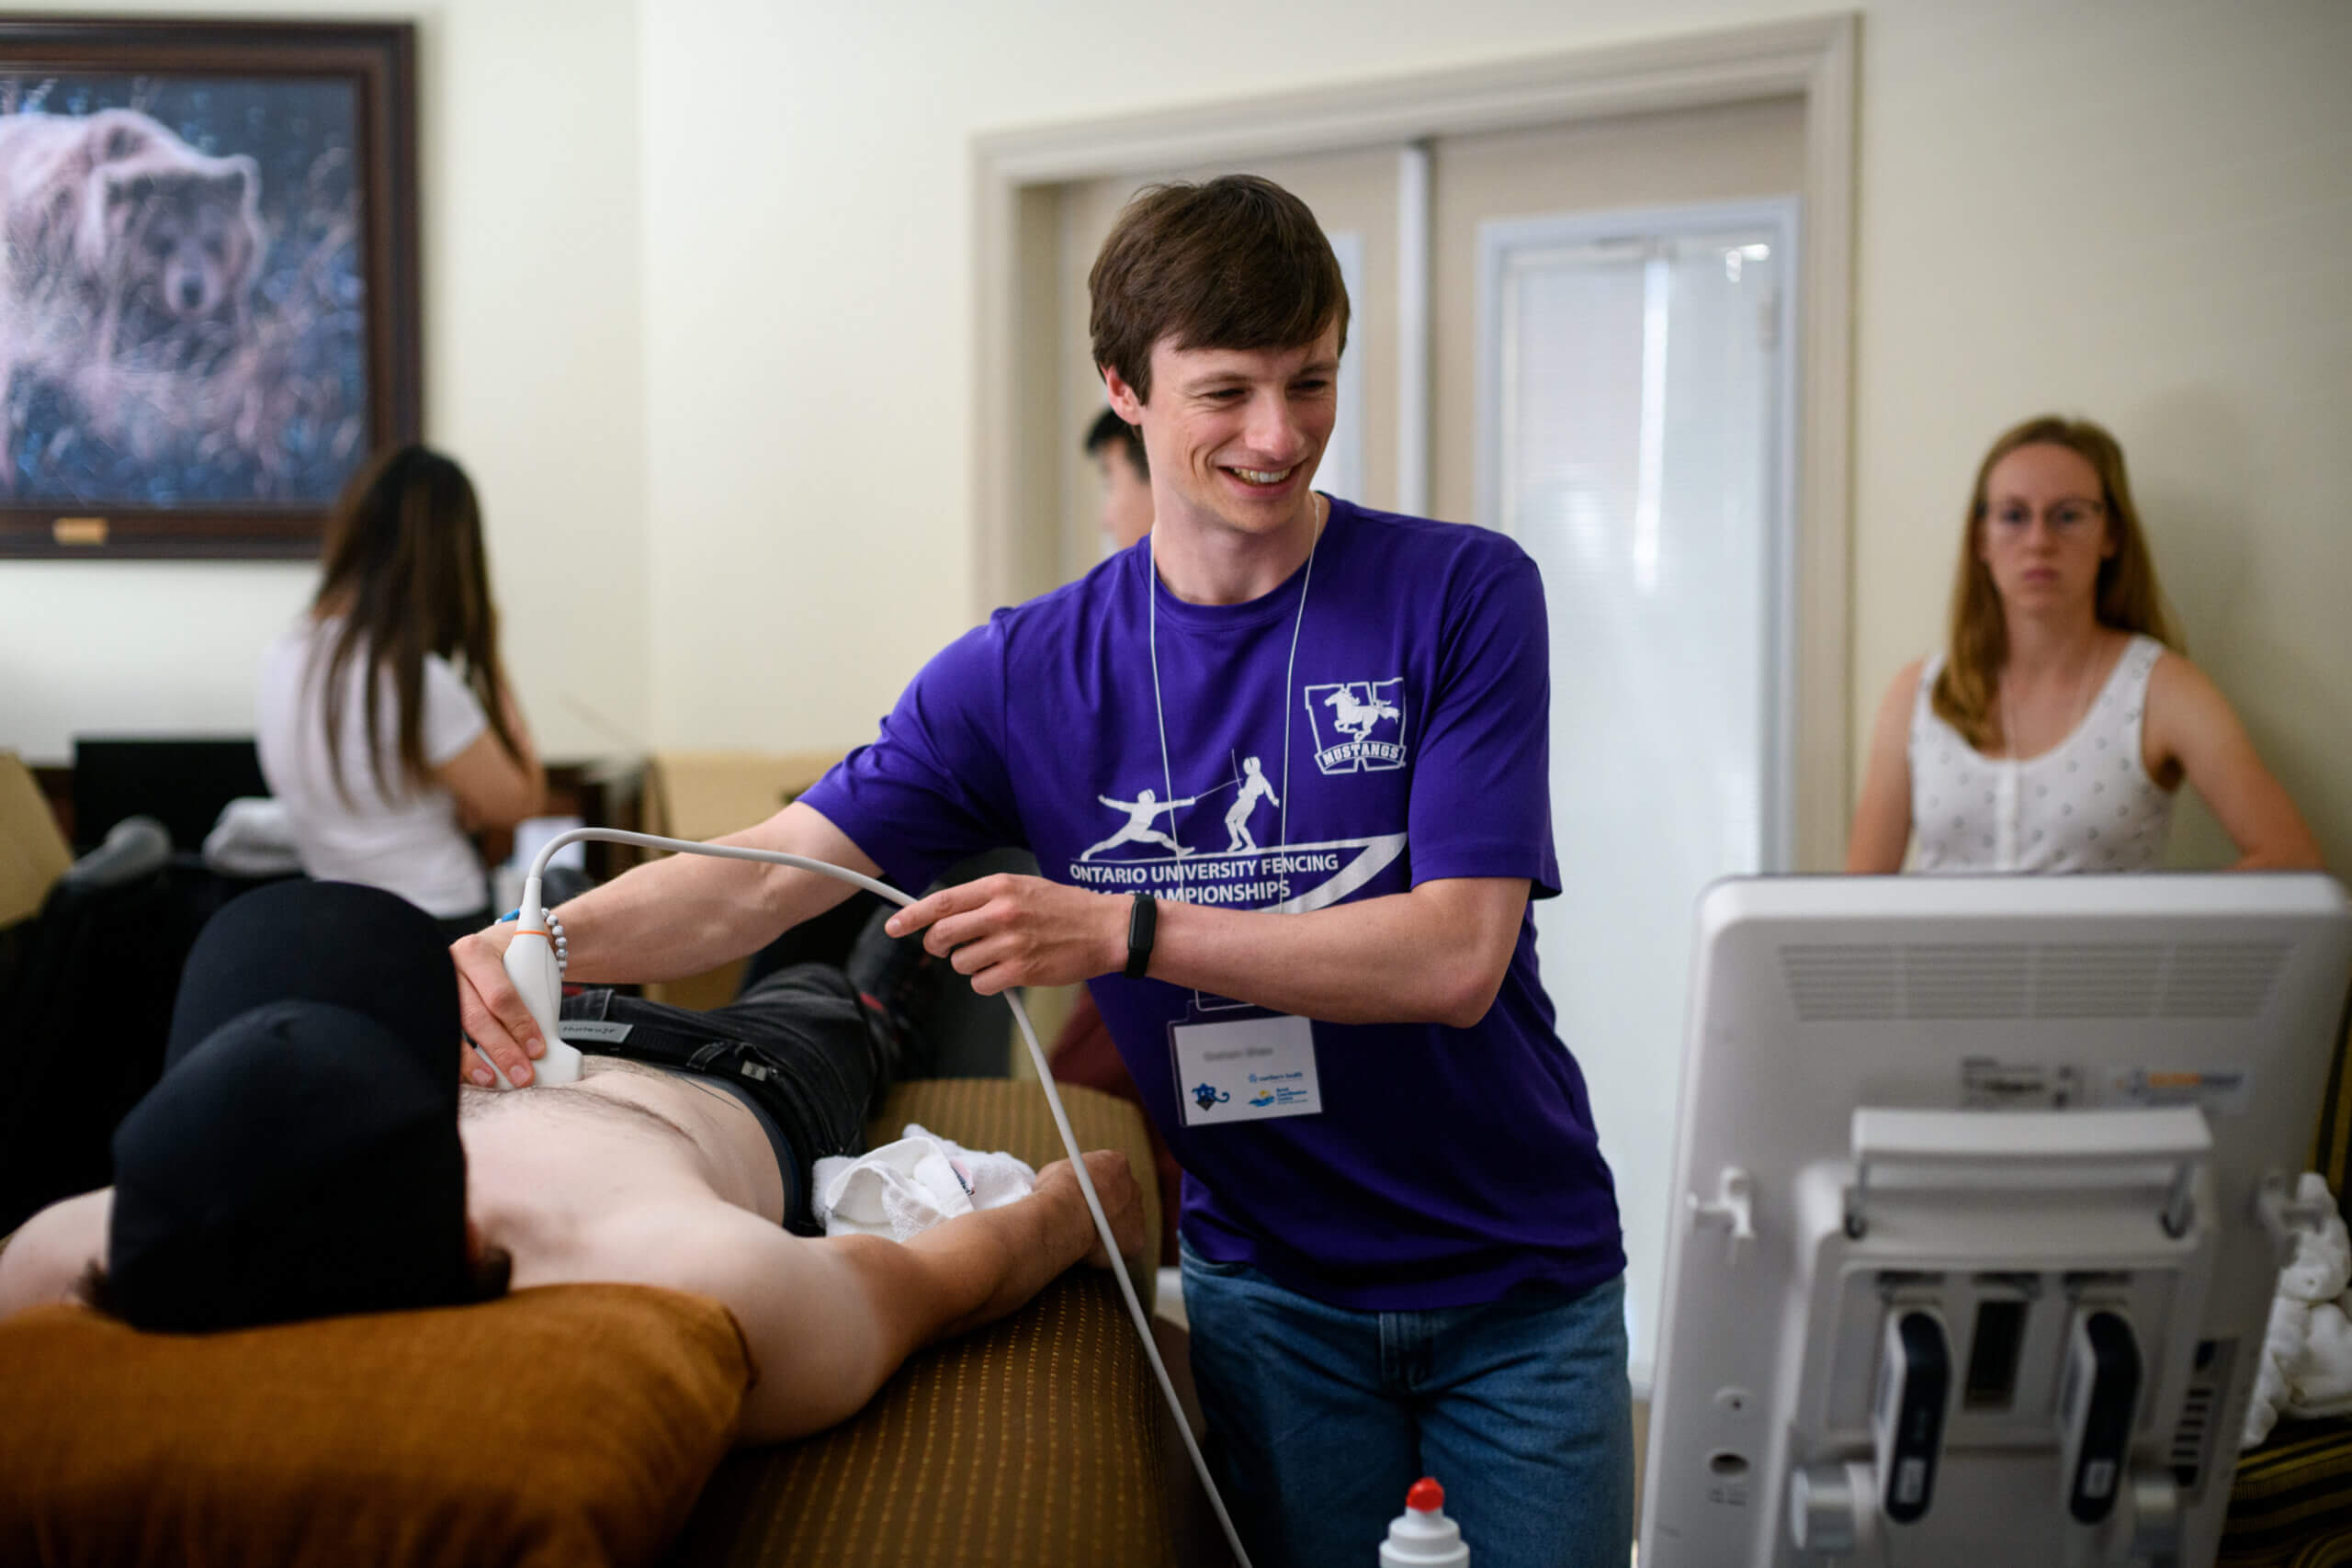 Learn POCUS skills with hands-on scanning stations at the Rural POCUS Congress